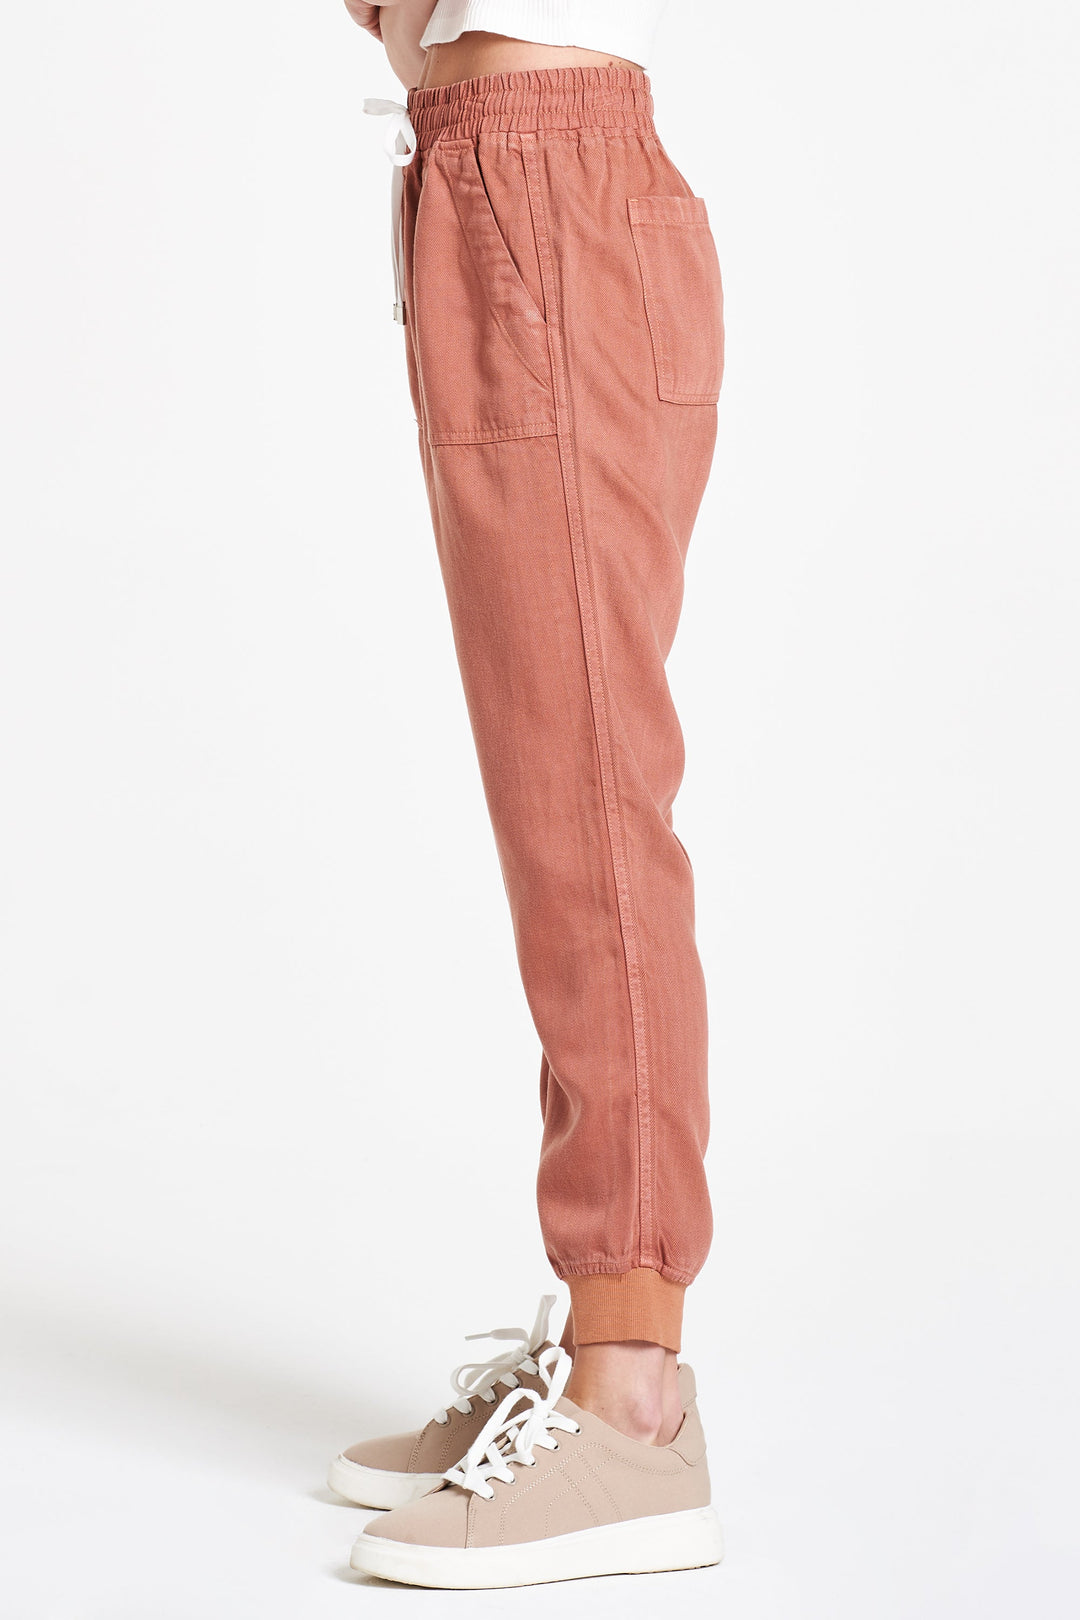 image of a female model wearing a JACEY SUPER HIGH RISE CROPPED JOGGER PANTS WISTFUL MAUVE PANTS